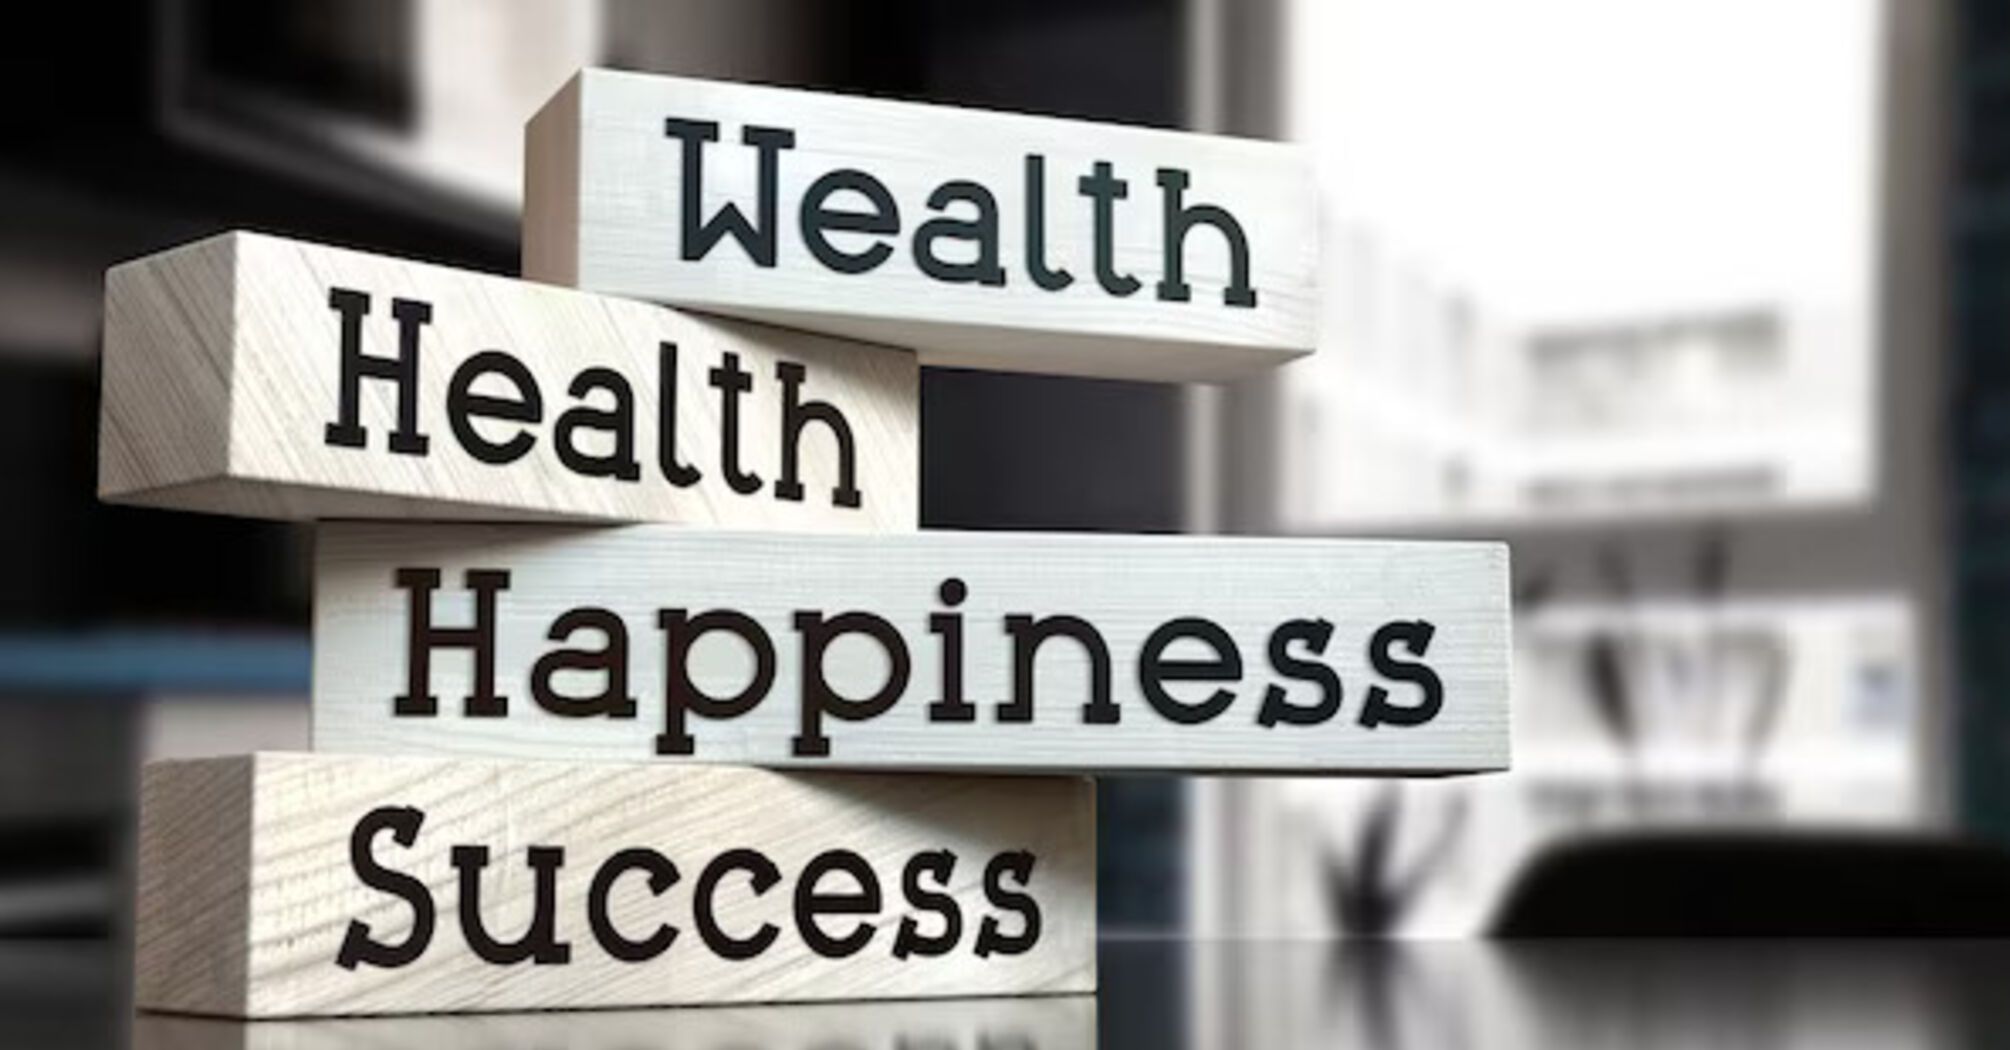 Happiness, wealth and success